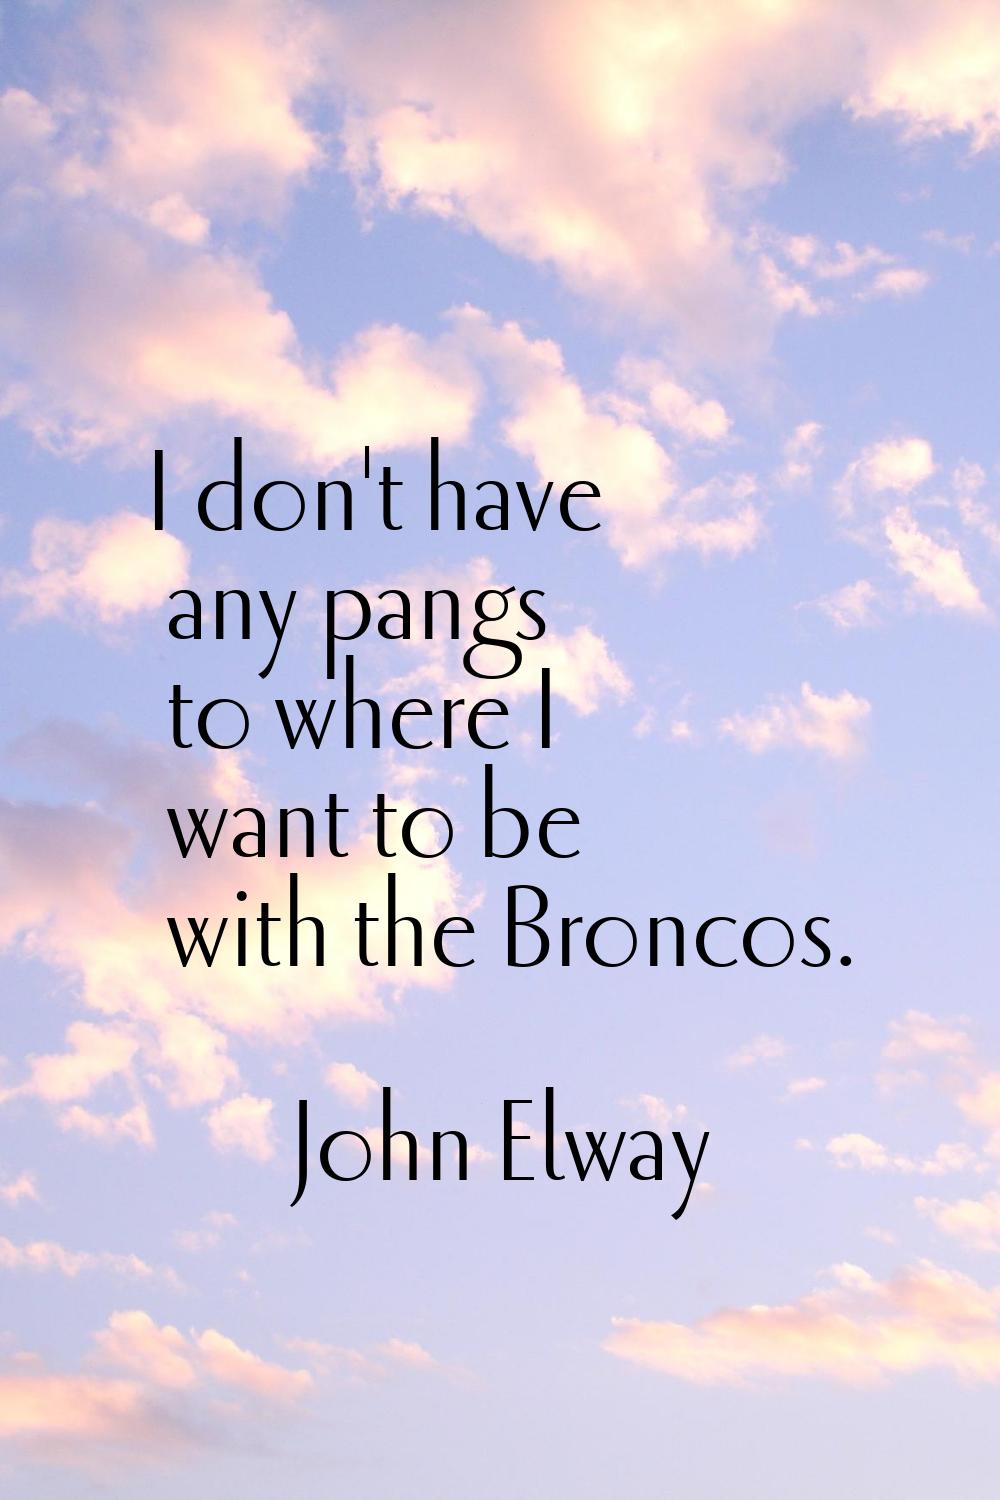 I don't have any pangs to where I want to be with the Broncos.